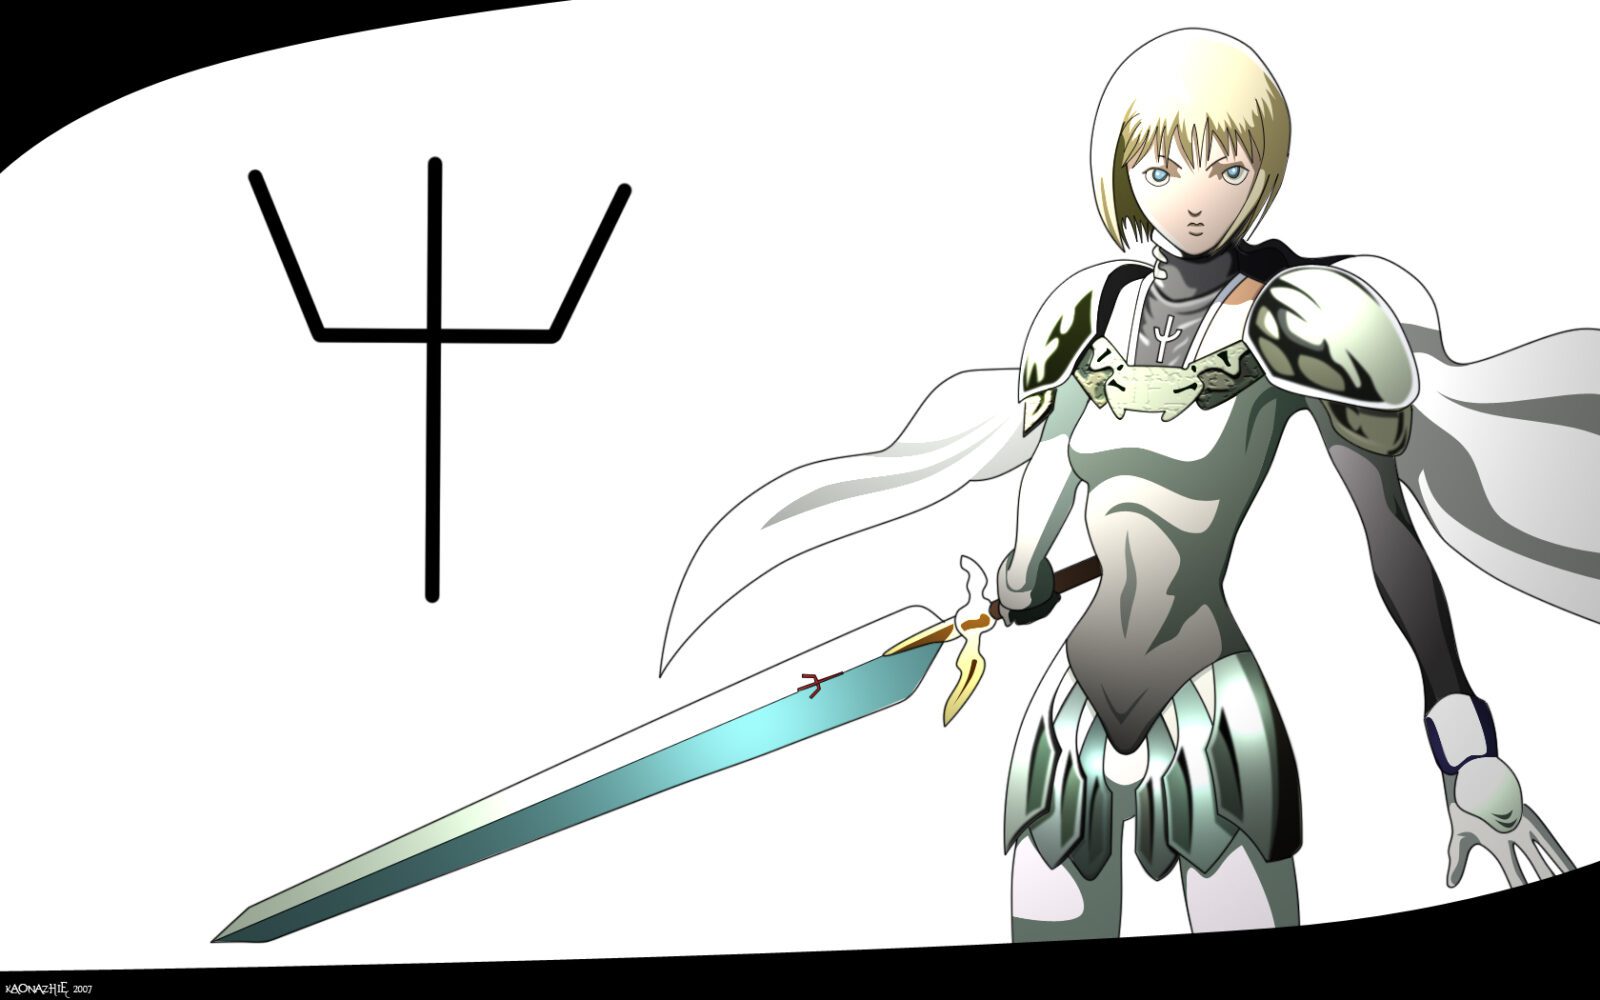 The Most Powerful Awakened Being in Claymore: Priscilla vs Claire